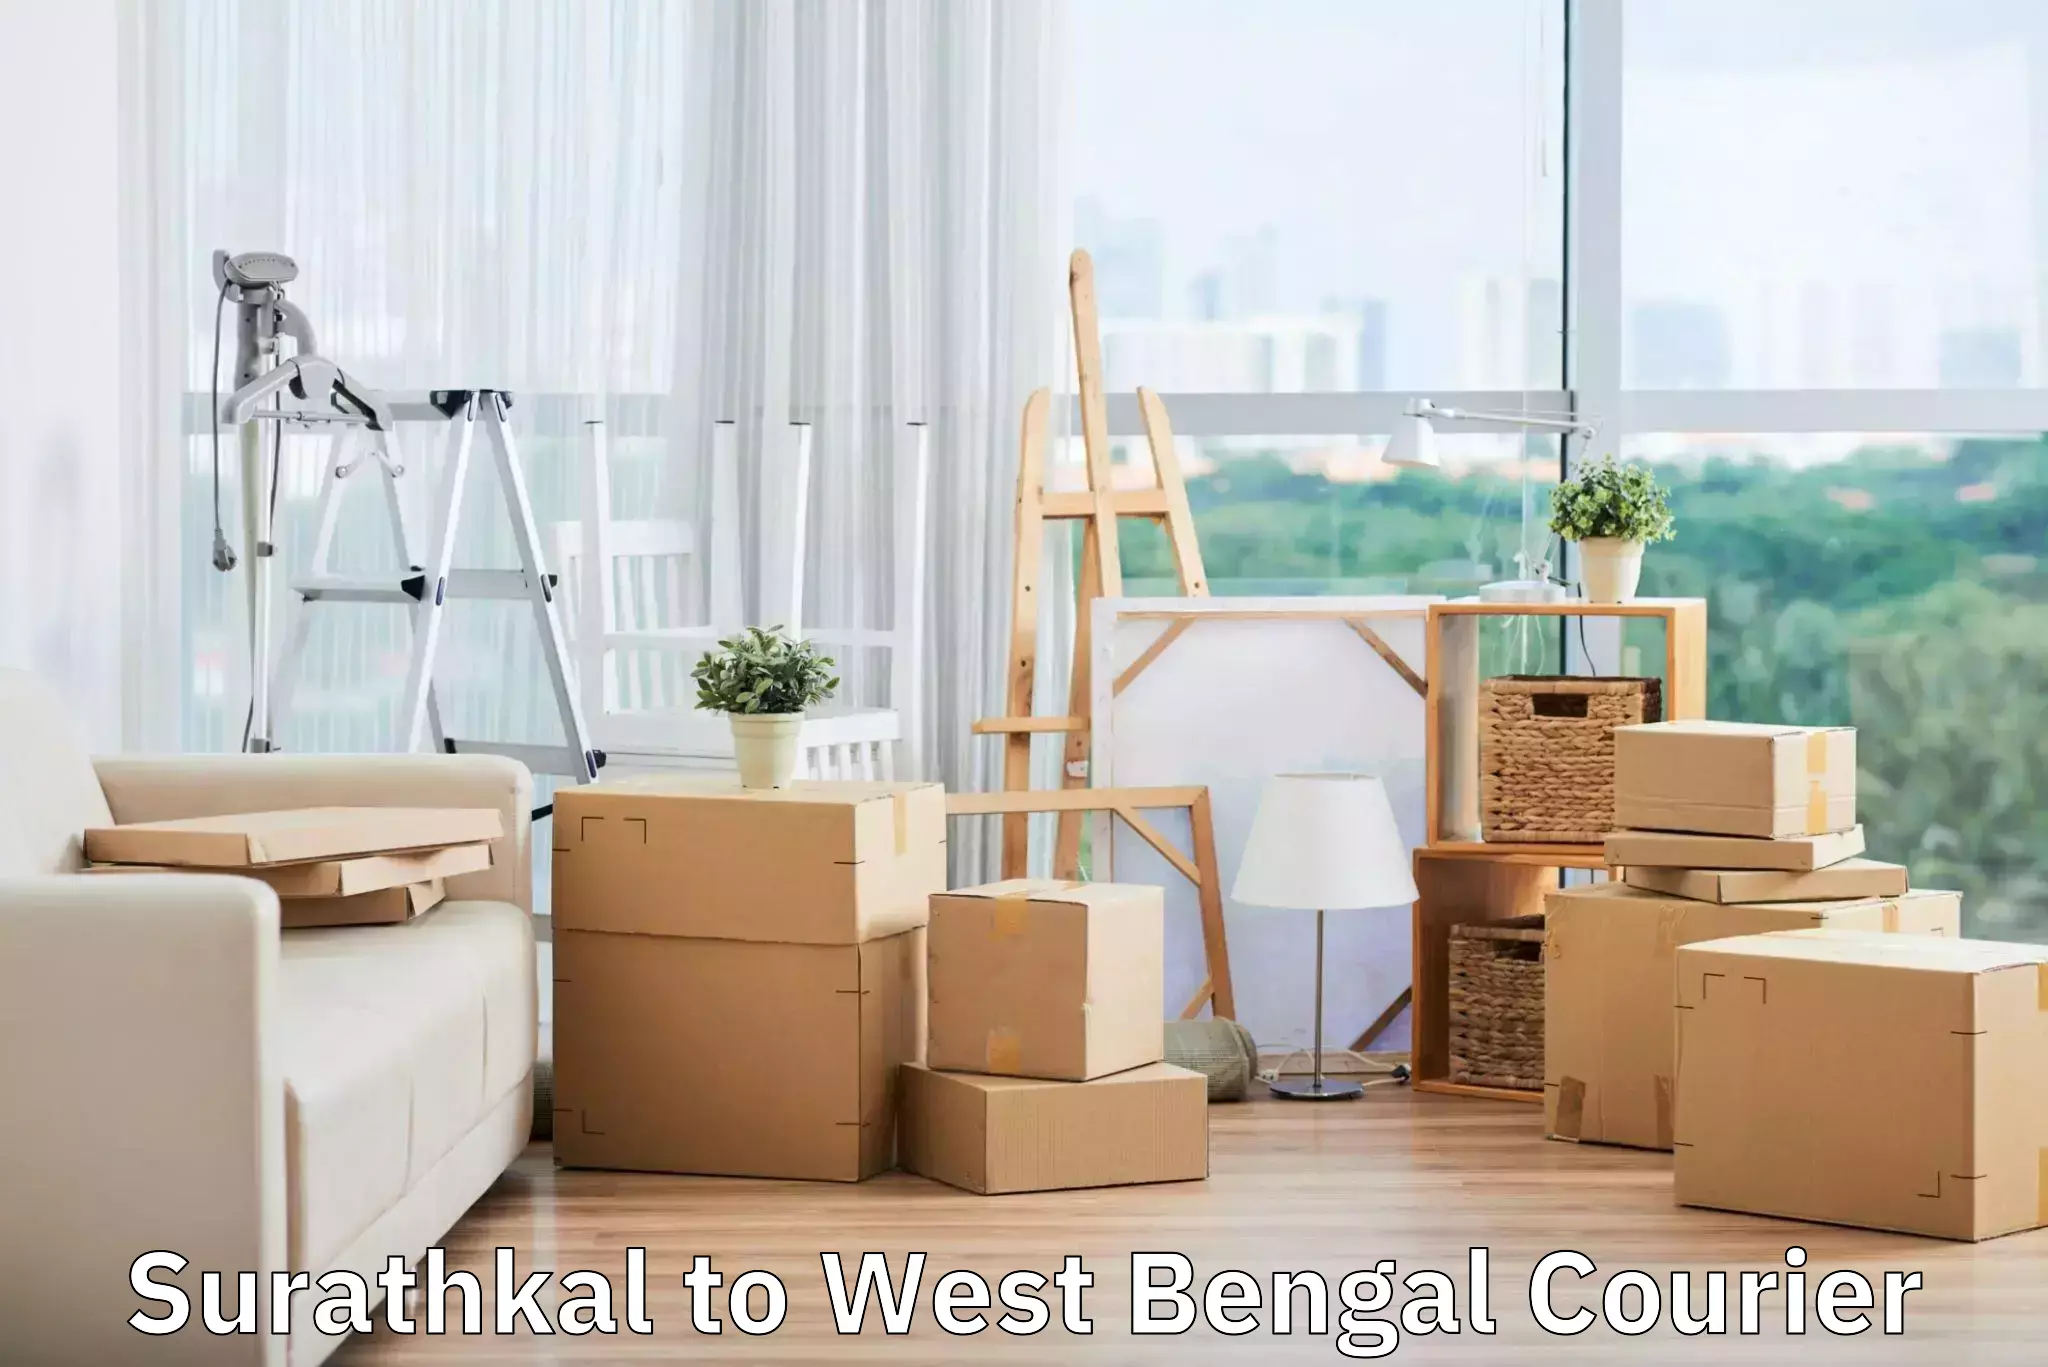 Urgent luggage shipment Surathkal to West Bengal